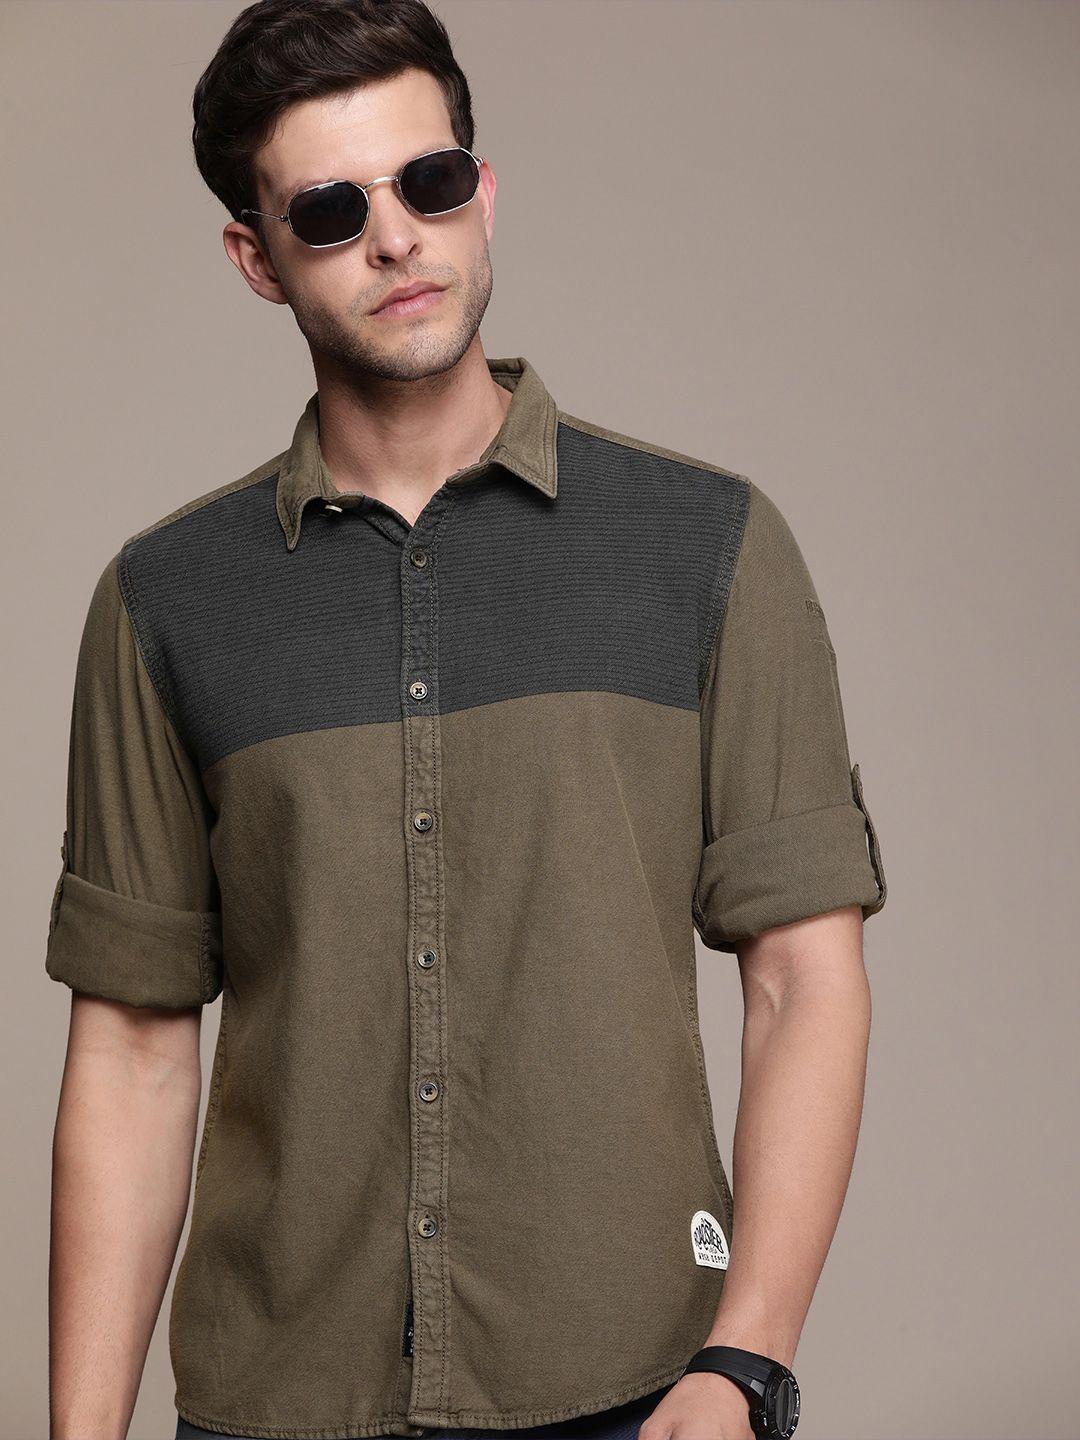 the roadster lifestyle co. colourblocked pure cotton casual shirt